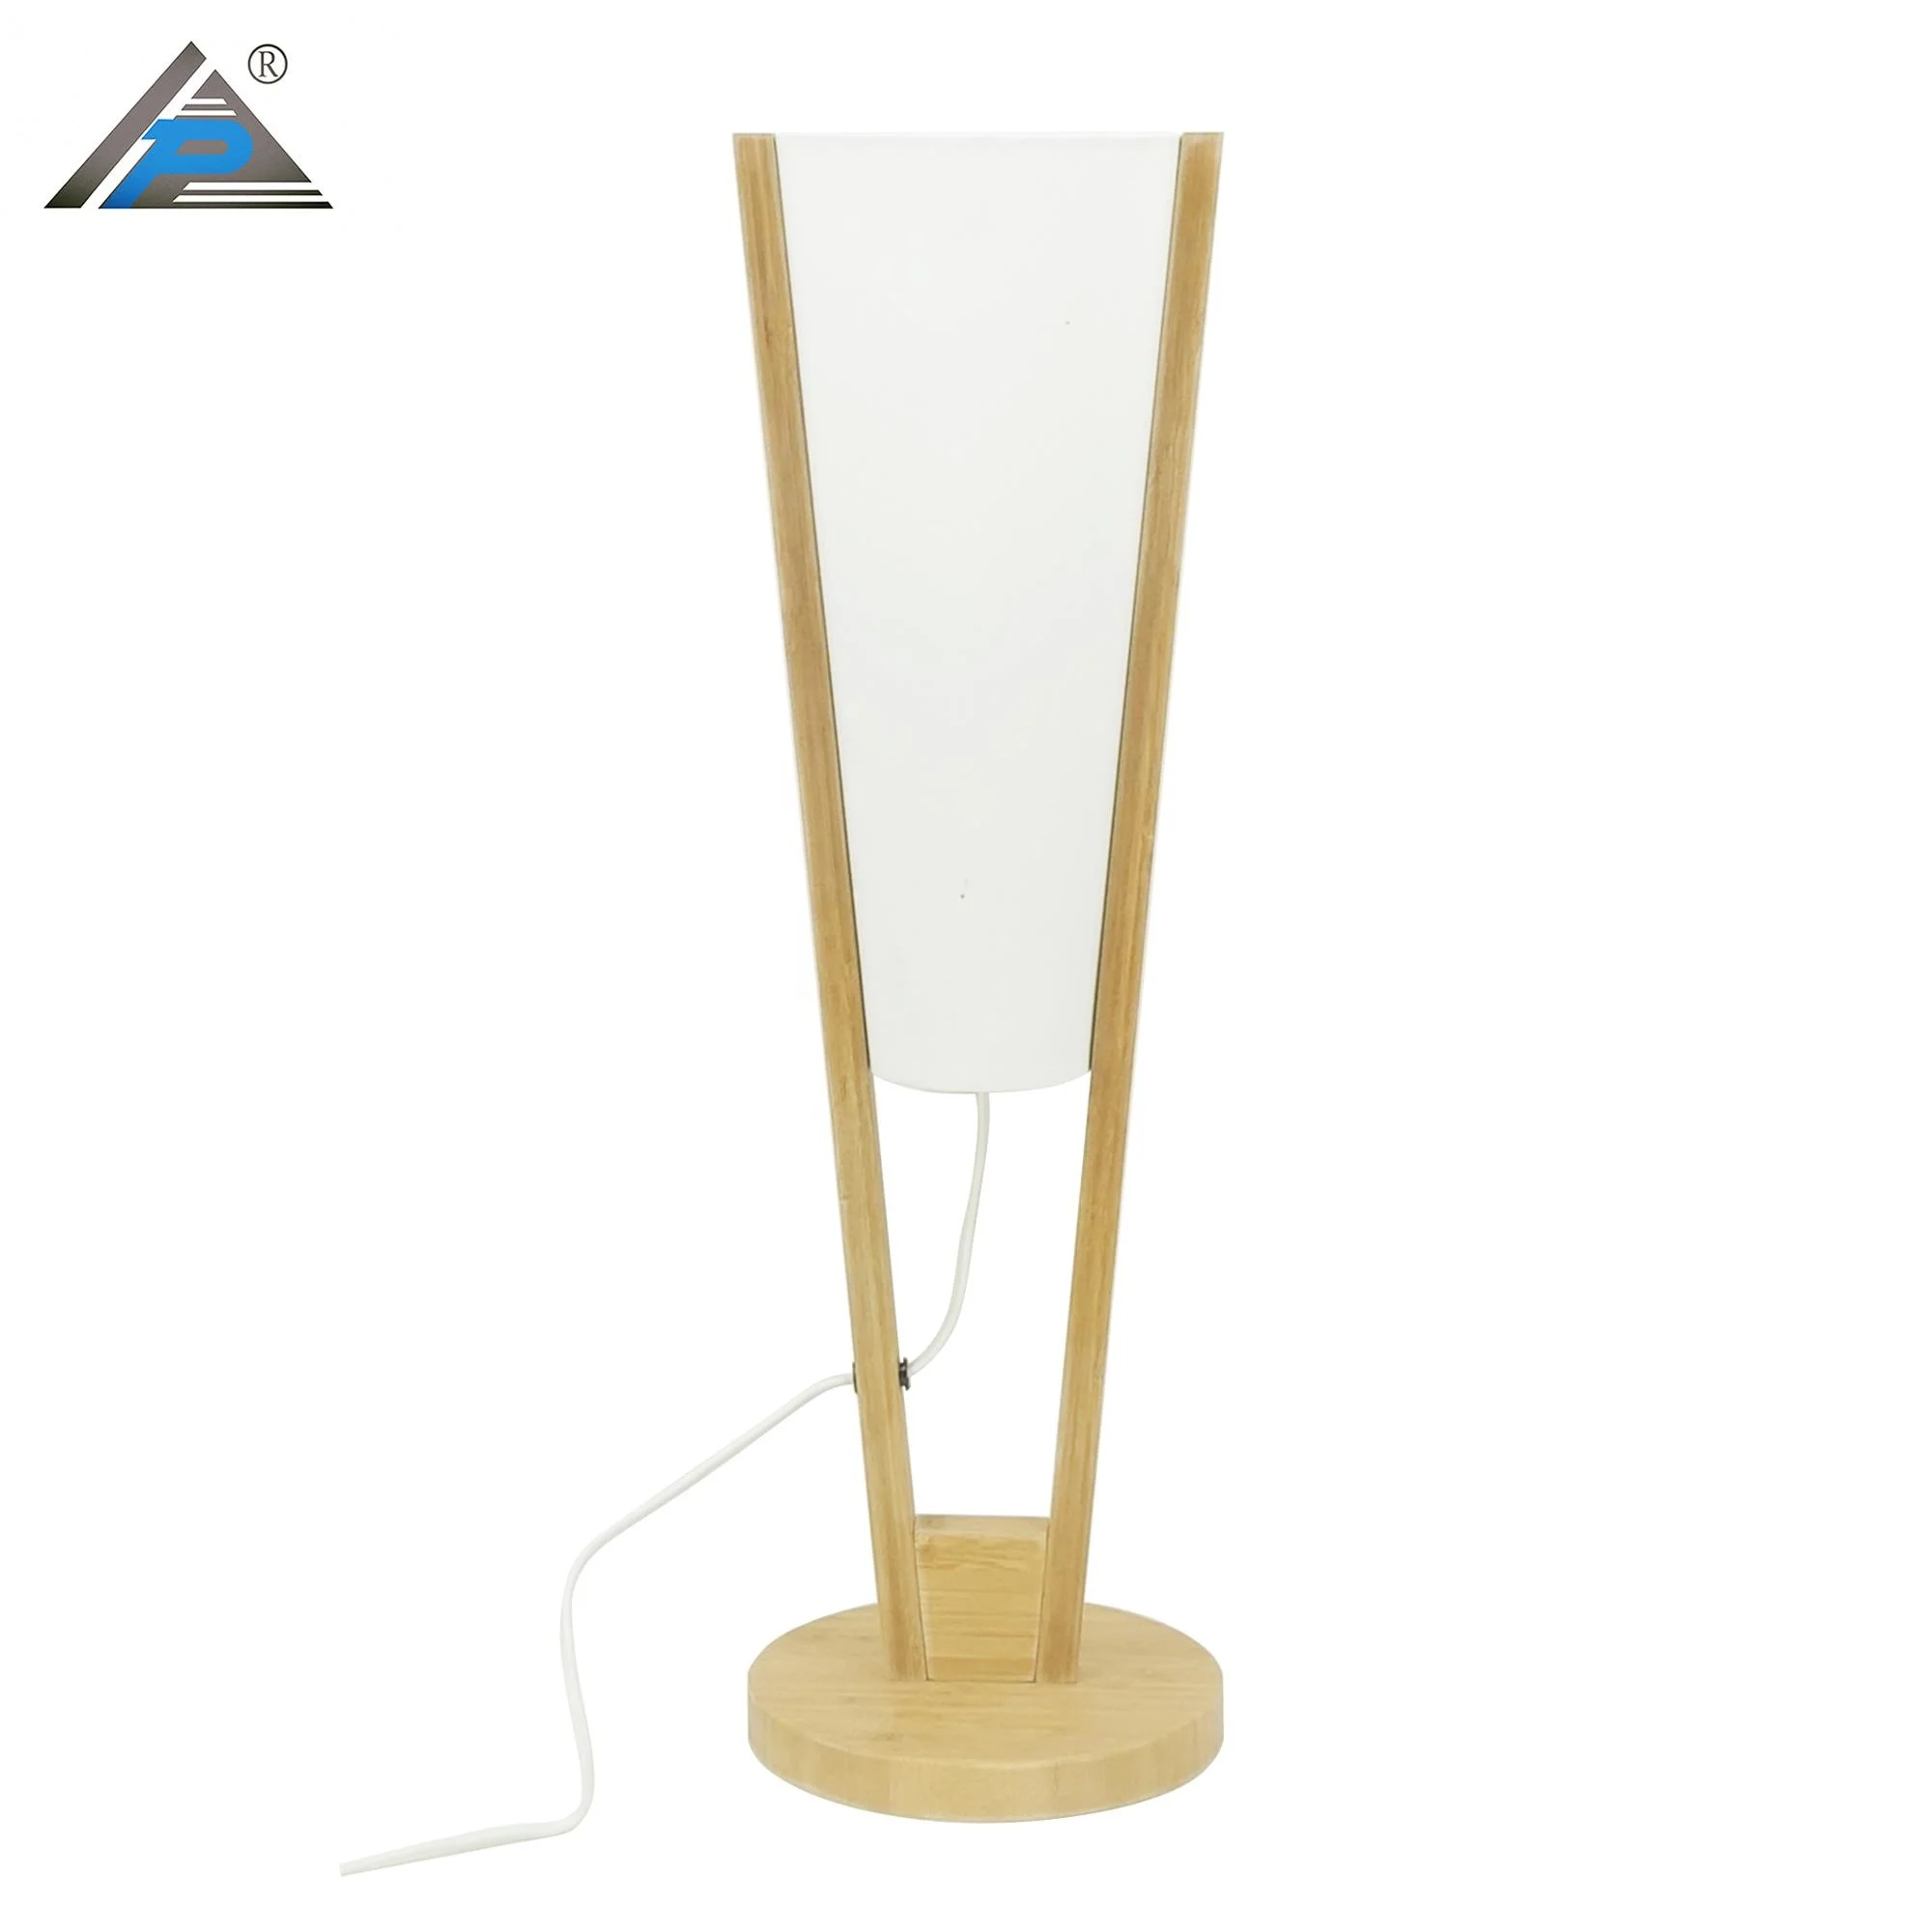 New Lampare European Style Inverted Triangle Tischlampe with Bambus Base table lamp for Bedside Decorative Home Decor